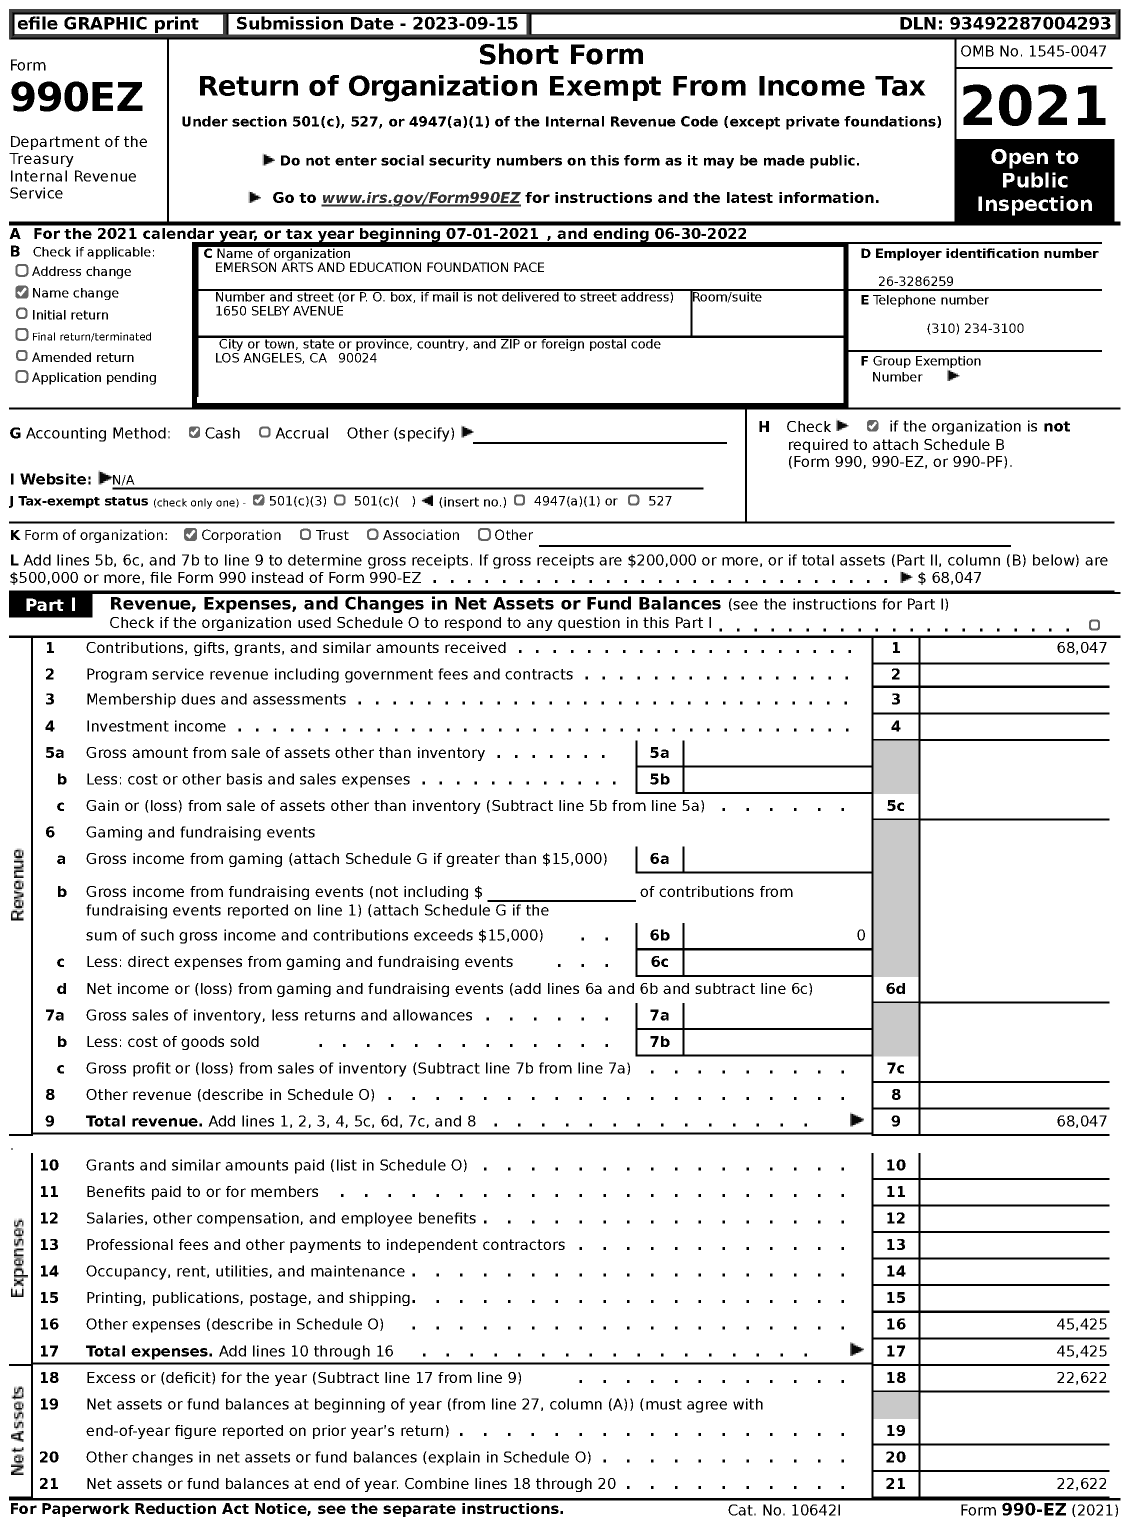 Image of first page of 2021 Form 990EZ for Emerson Arts and Education Foundation Pace